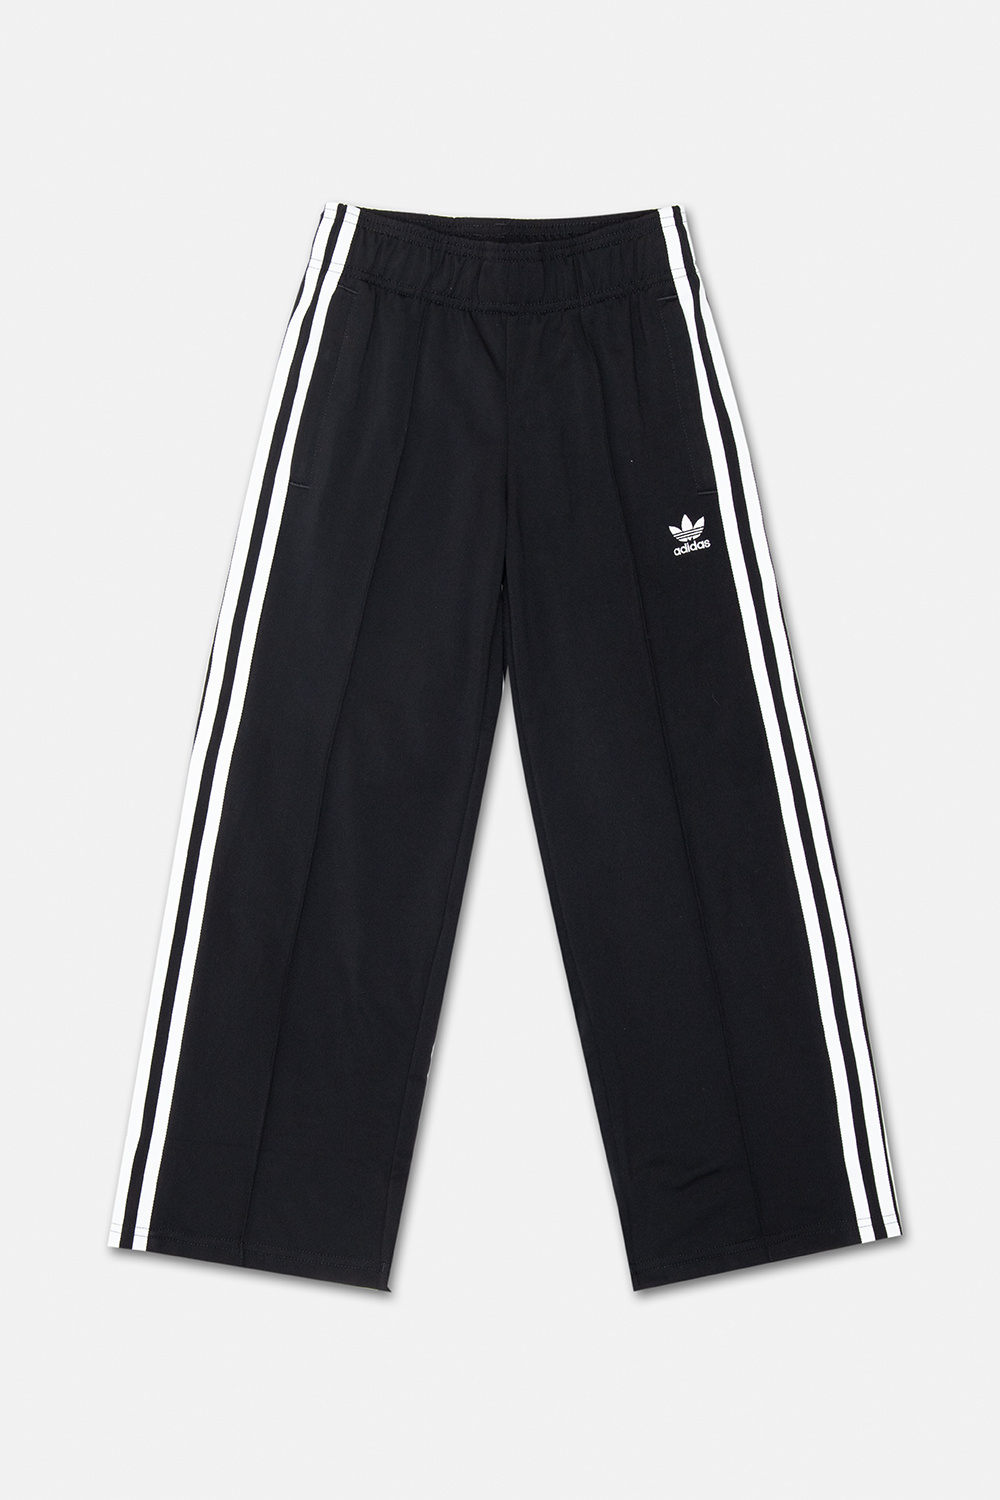 adidas tint Kids Trousers with logo